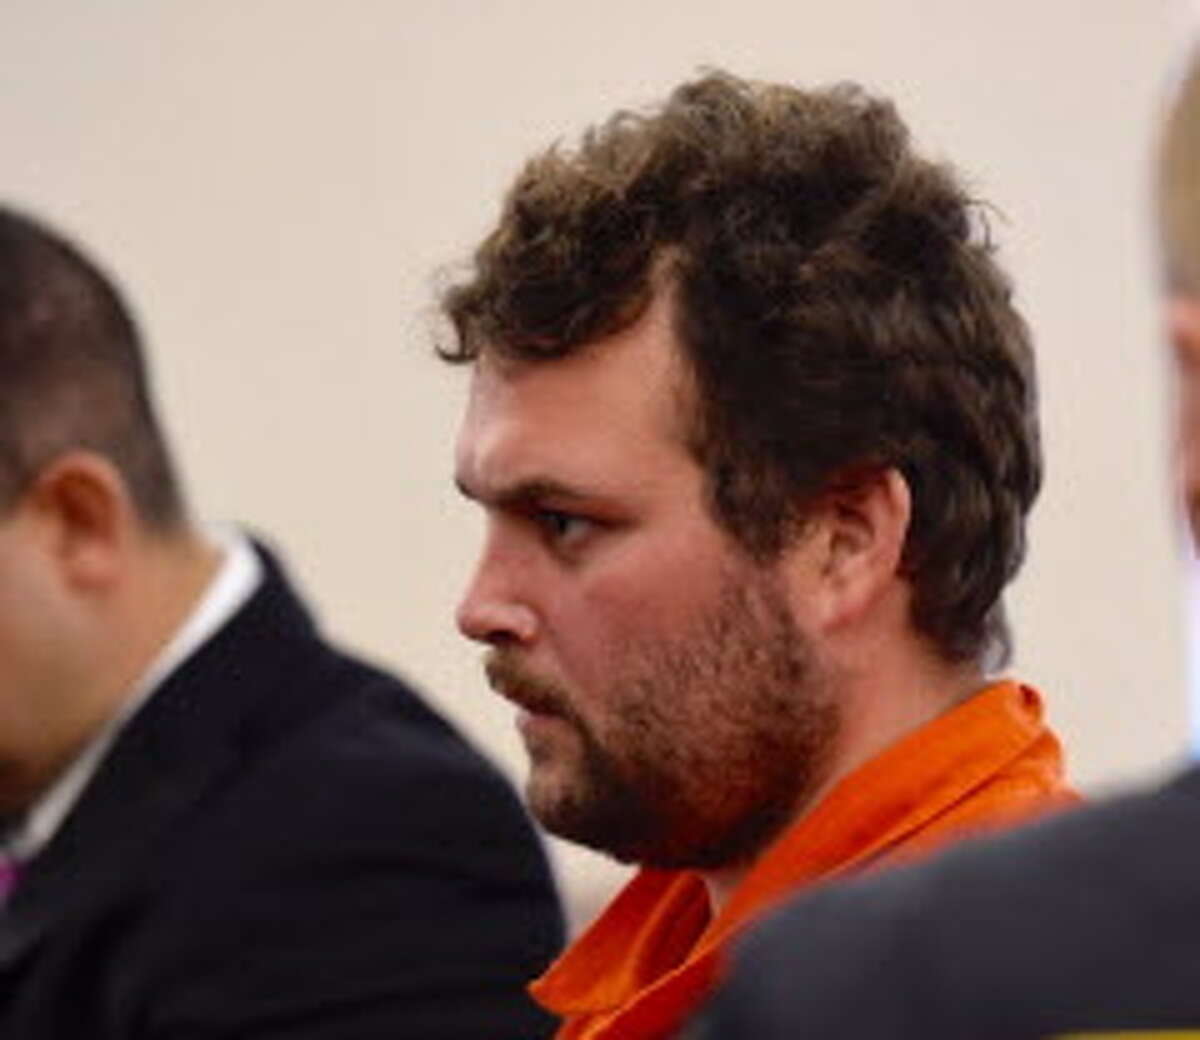 Sean Moreland, 32, appears in Albany County Court Friday morning. A suspec in the killing of barber Jacquelyn Porreca, Moreland of Colonie rejected a plea bargain offer in an unrelated burglary case. (Skip Dickstein / Times Union)